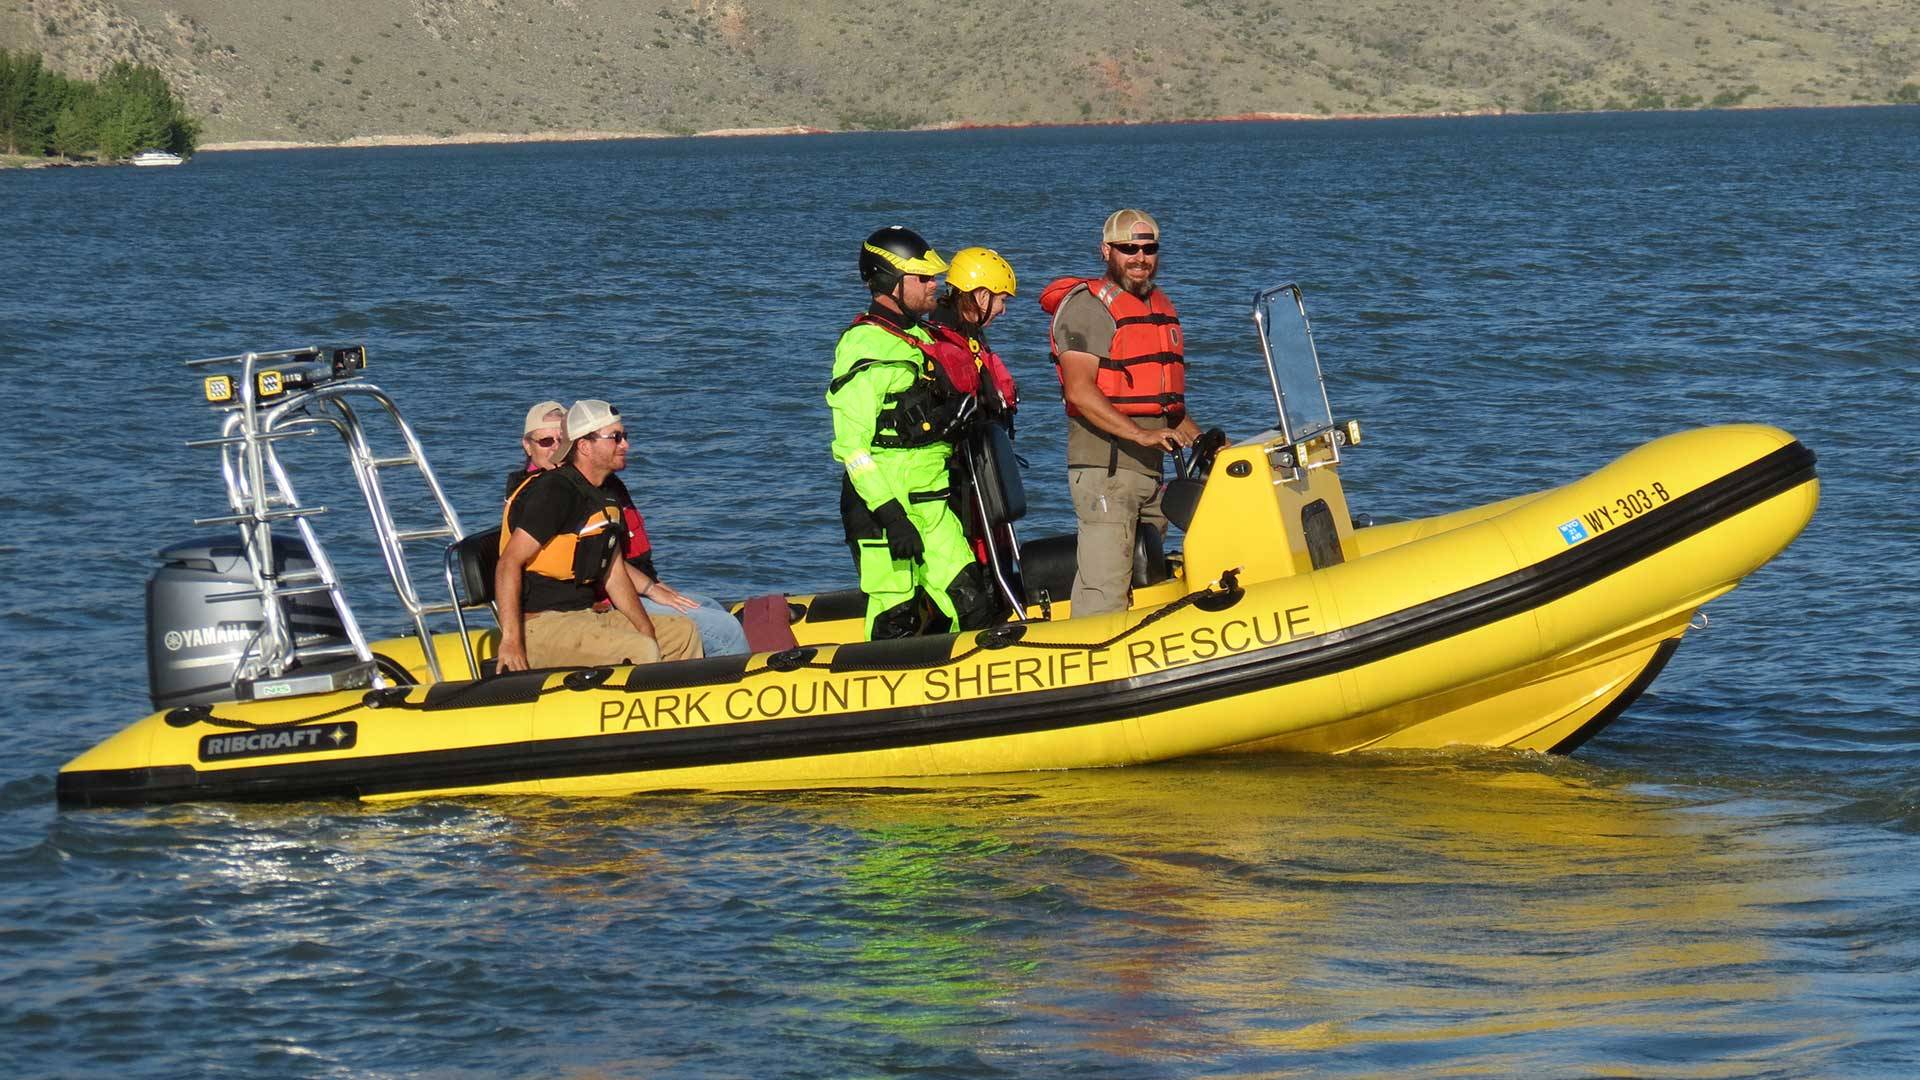 Park County Search and Rescue boat